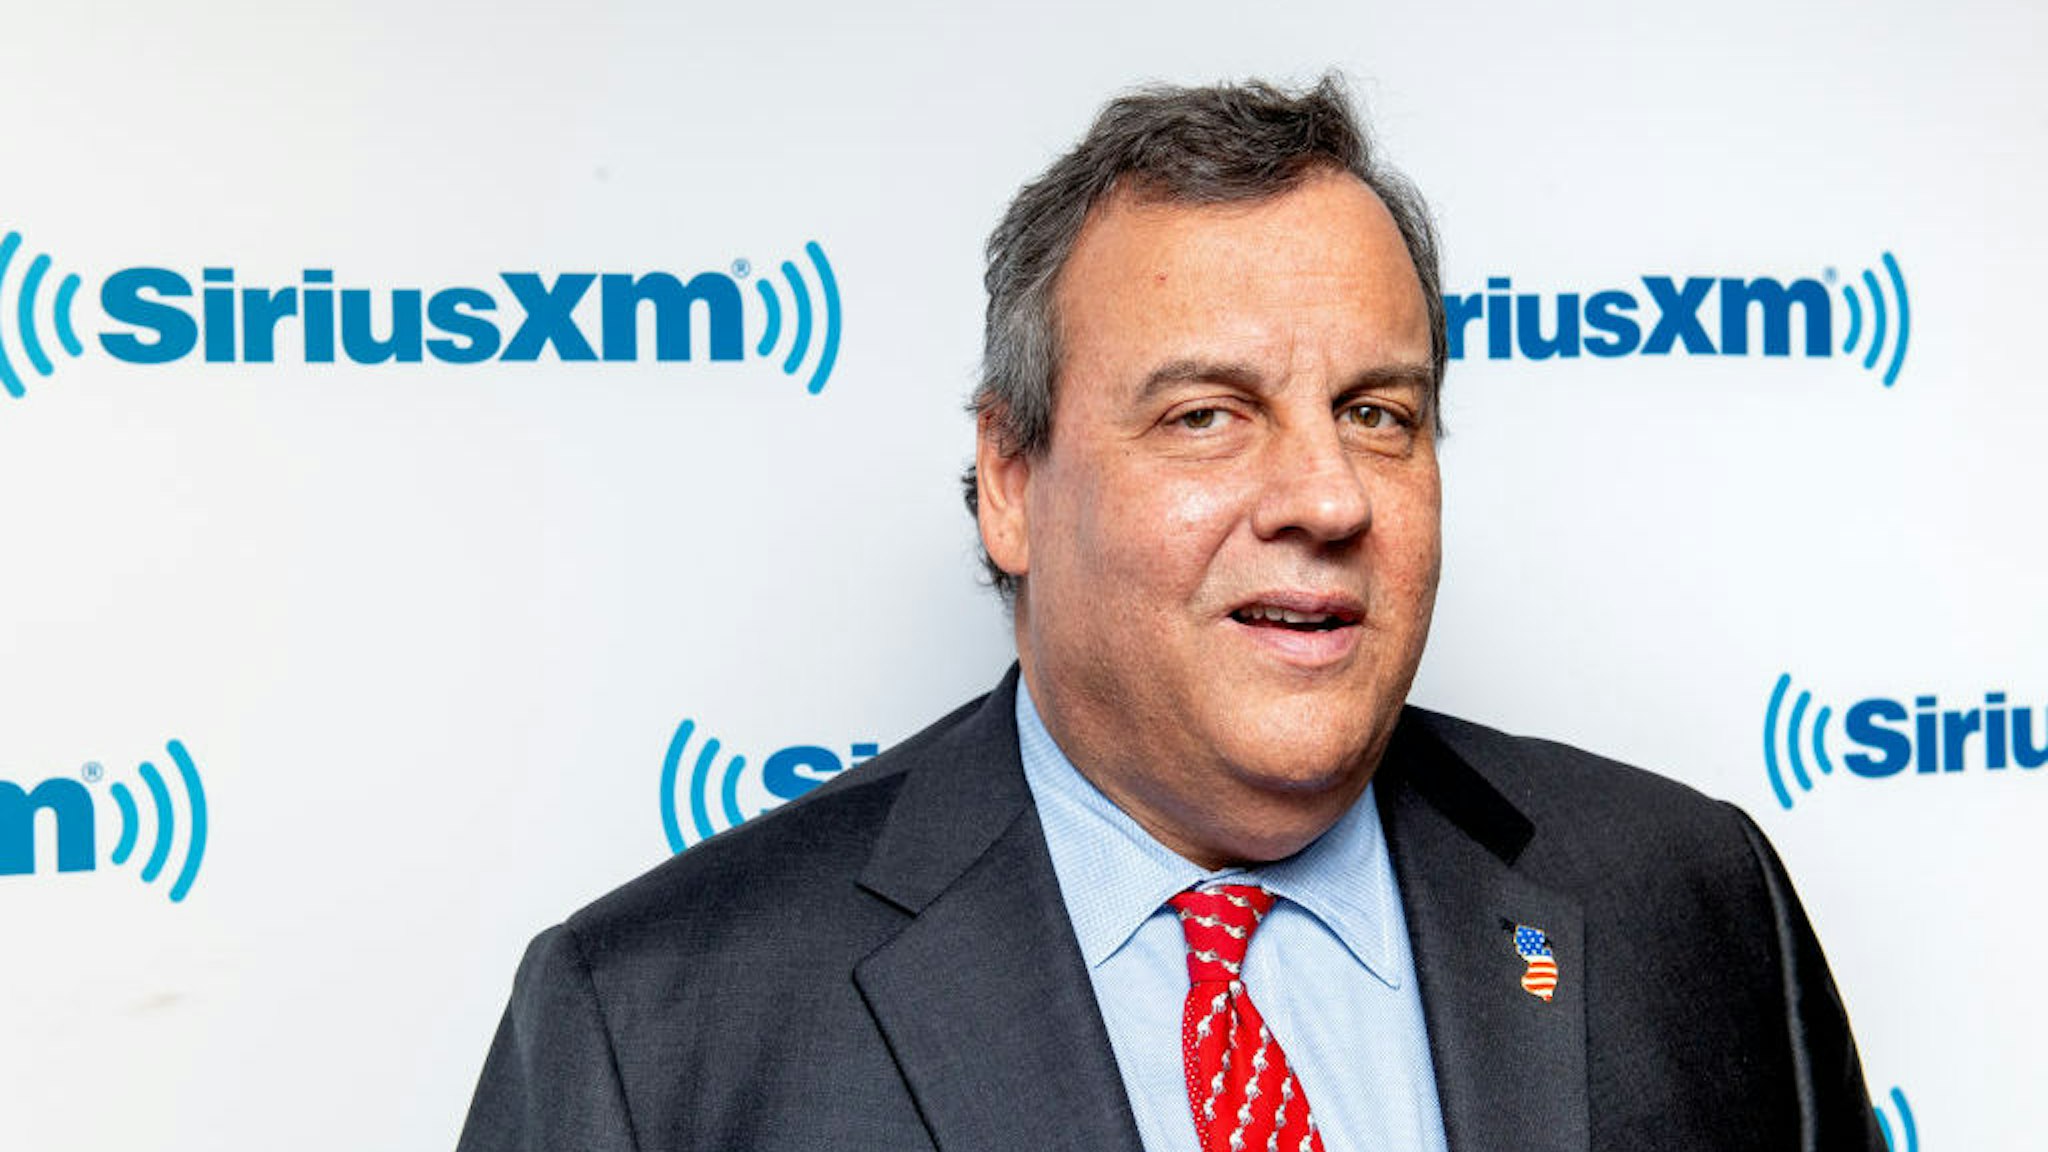 NEW YORK, NEW YORK - FEBRUARY 01: Former New Jersey Governor and presidential candidate Chris Christie visits SiriusXM Studios on February 01, 2019 in New York City. (Photo by Roy Rochlin/Getty Images)